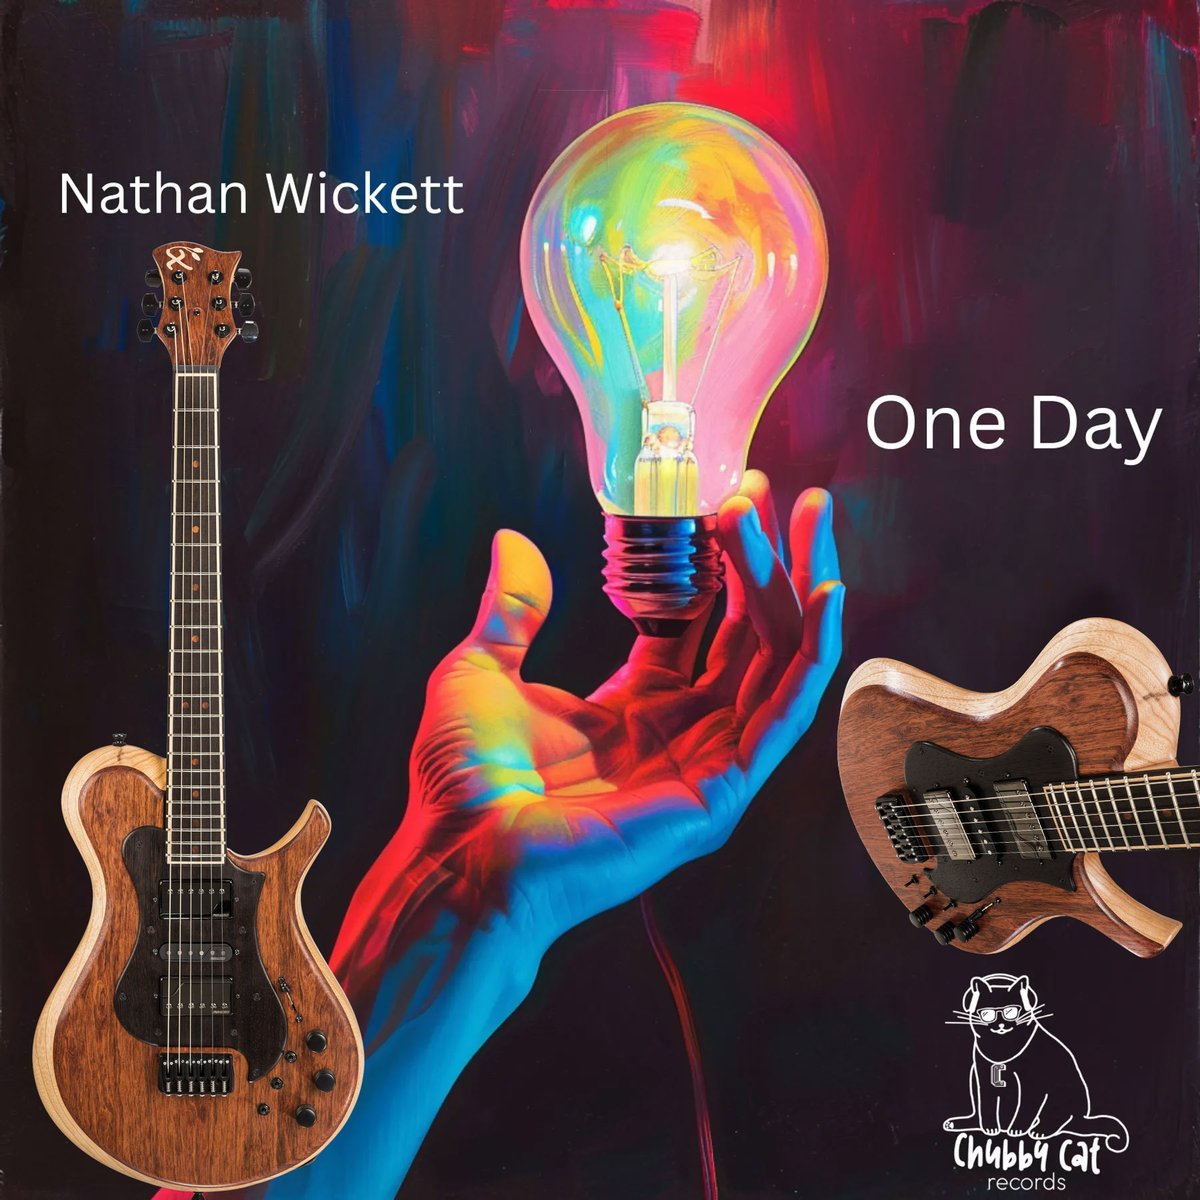 Listen to 'One Day' the new single from Nathan Wickett - youtu.be/XqnEBBC3gnM?si… - hear some of the Xylem 'Orianna' guitar in the mix too! #NewSong #TuneIn #guitars #guitarplayer #musicvideo #NewMusicDaily #altrock #rock #alternative #edge #U2 #ChristianRock #sound #goodmusic